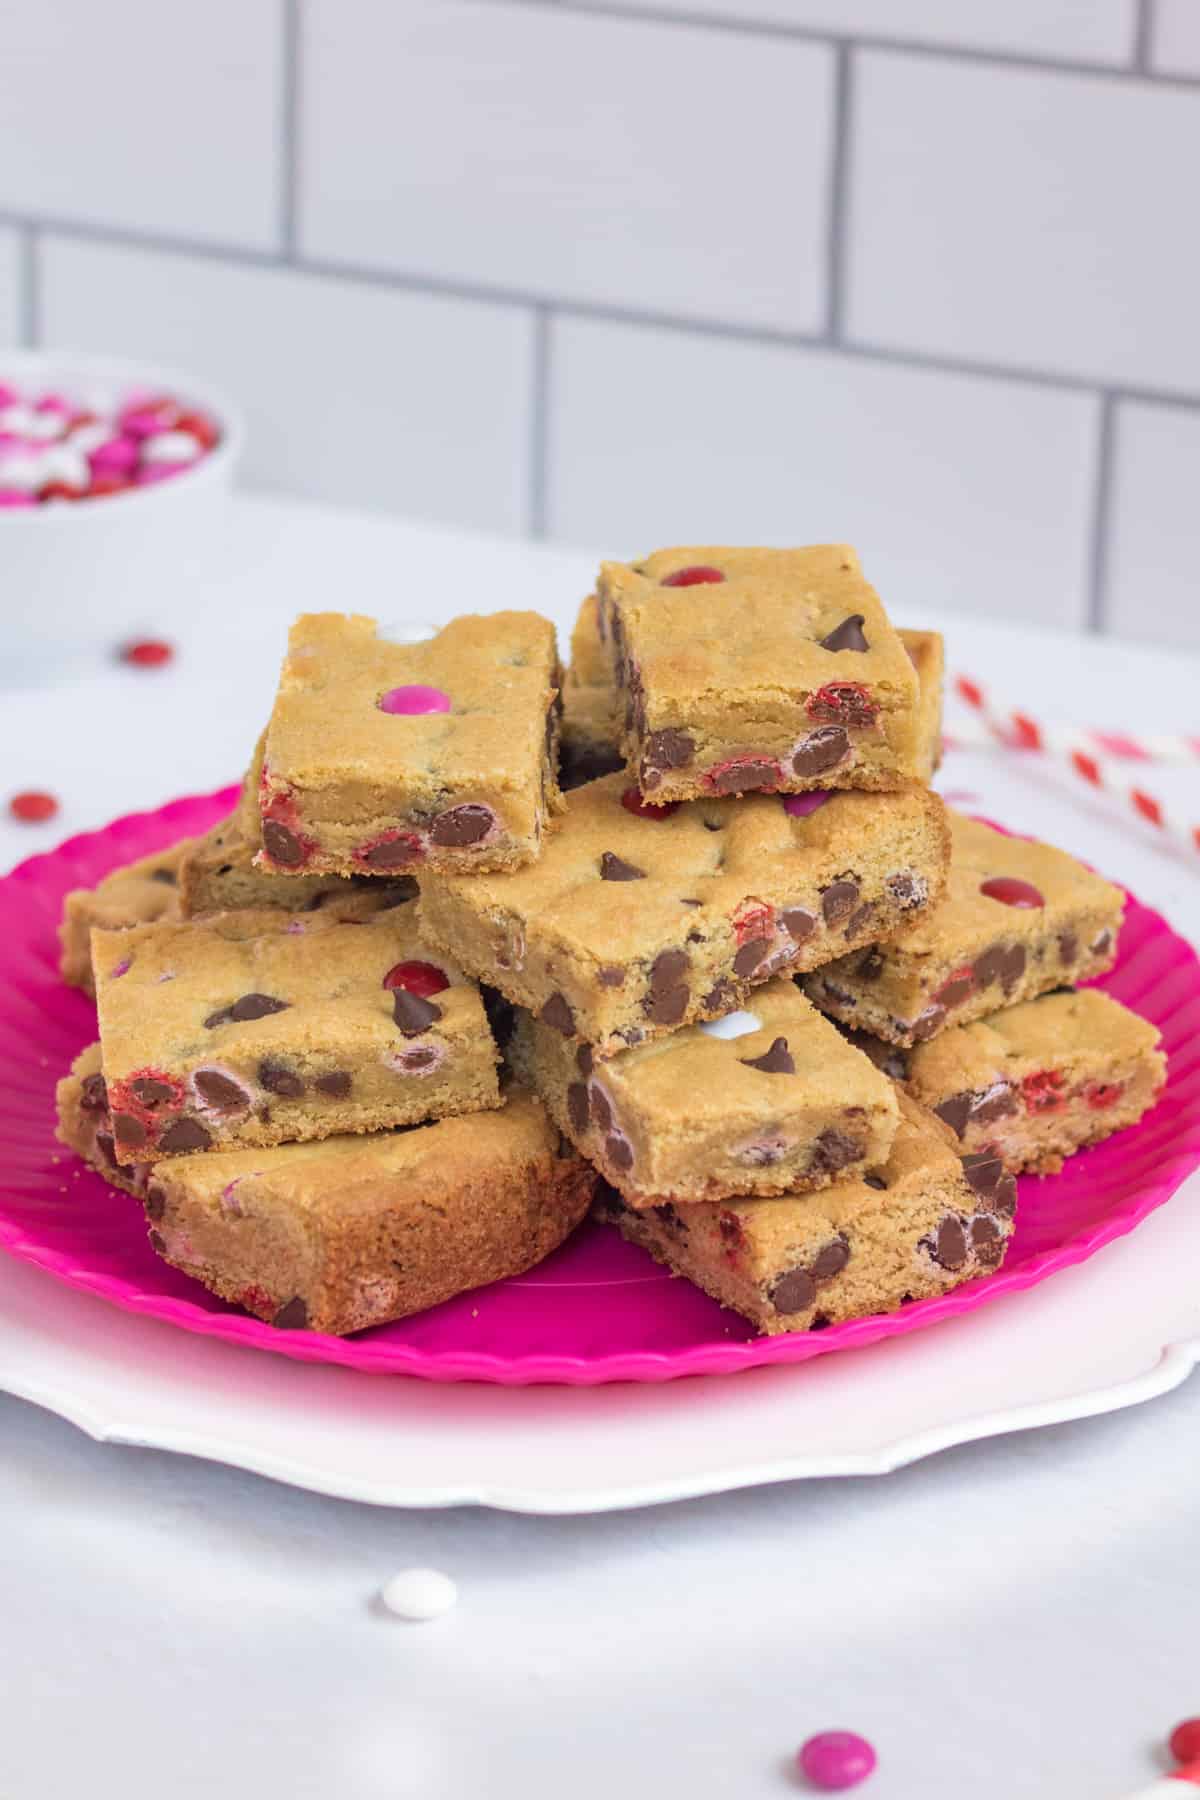 Valentines Day Cookie Bars arranged on a pink serving platter with red and pink paper straws and M&M candies around them.